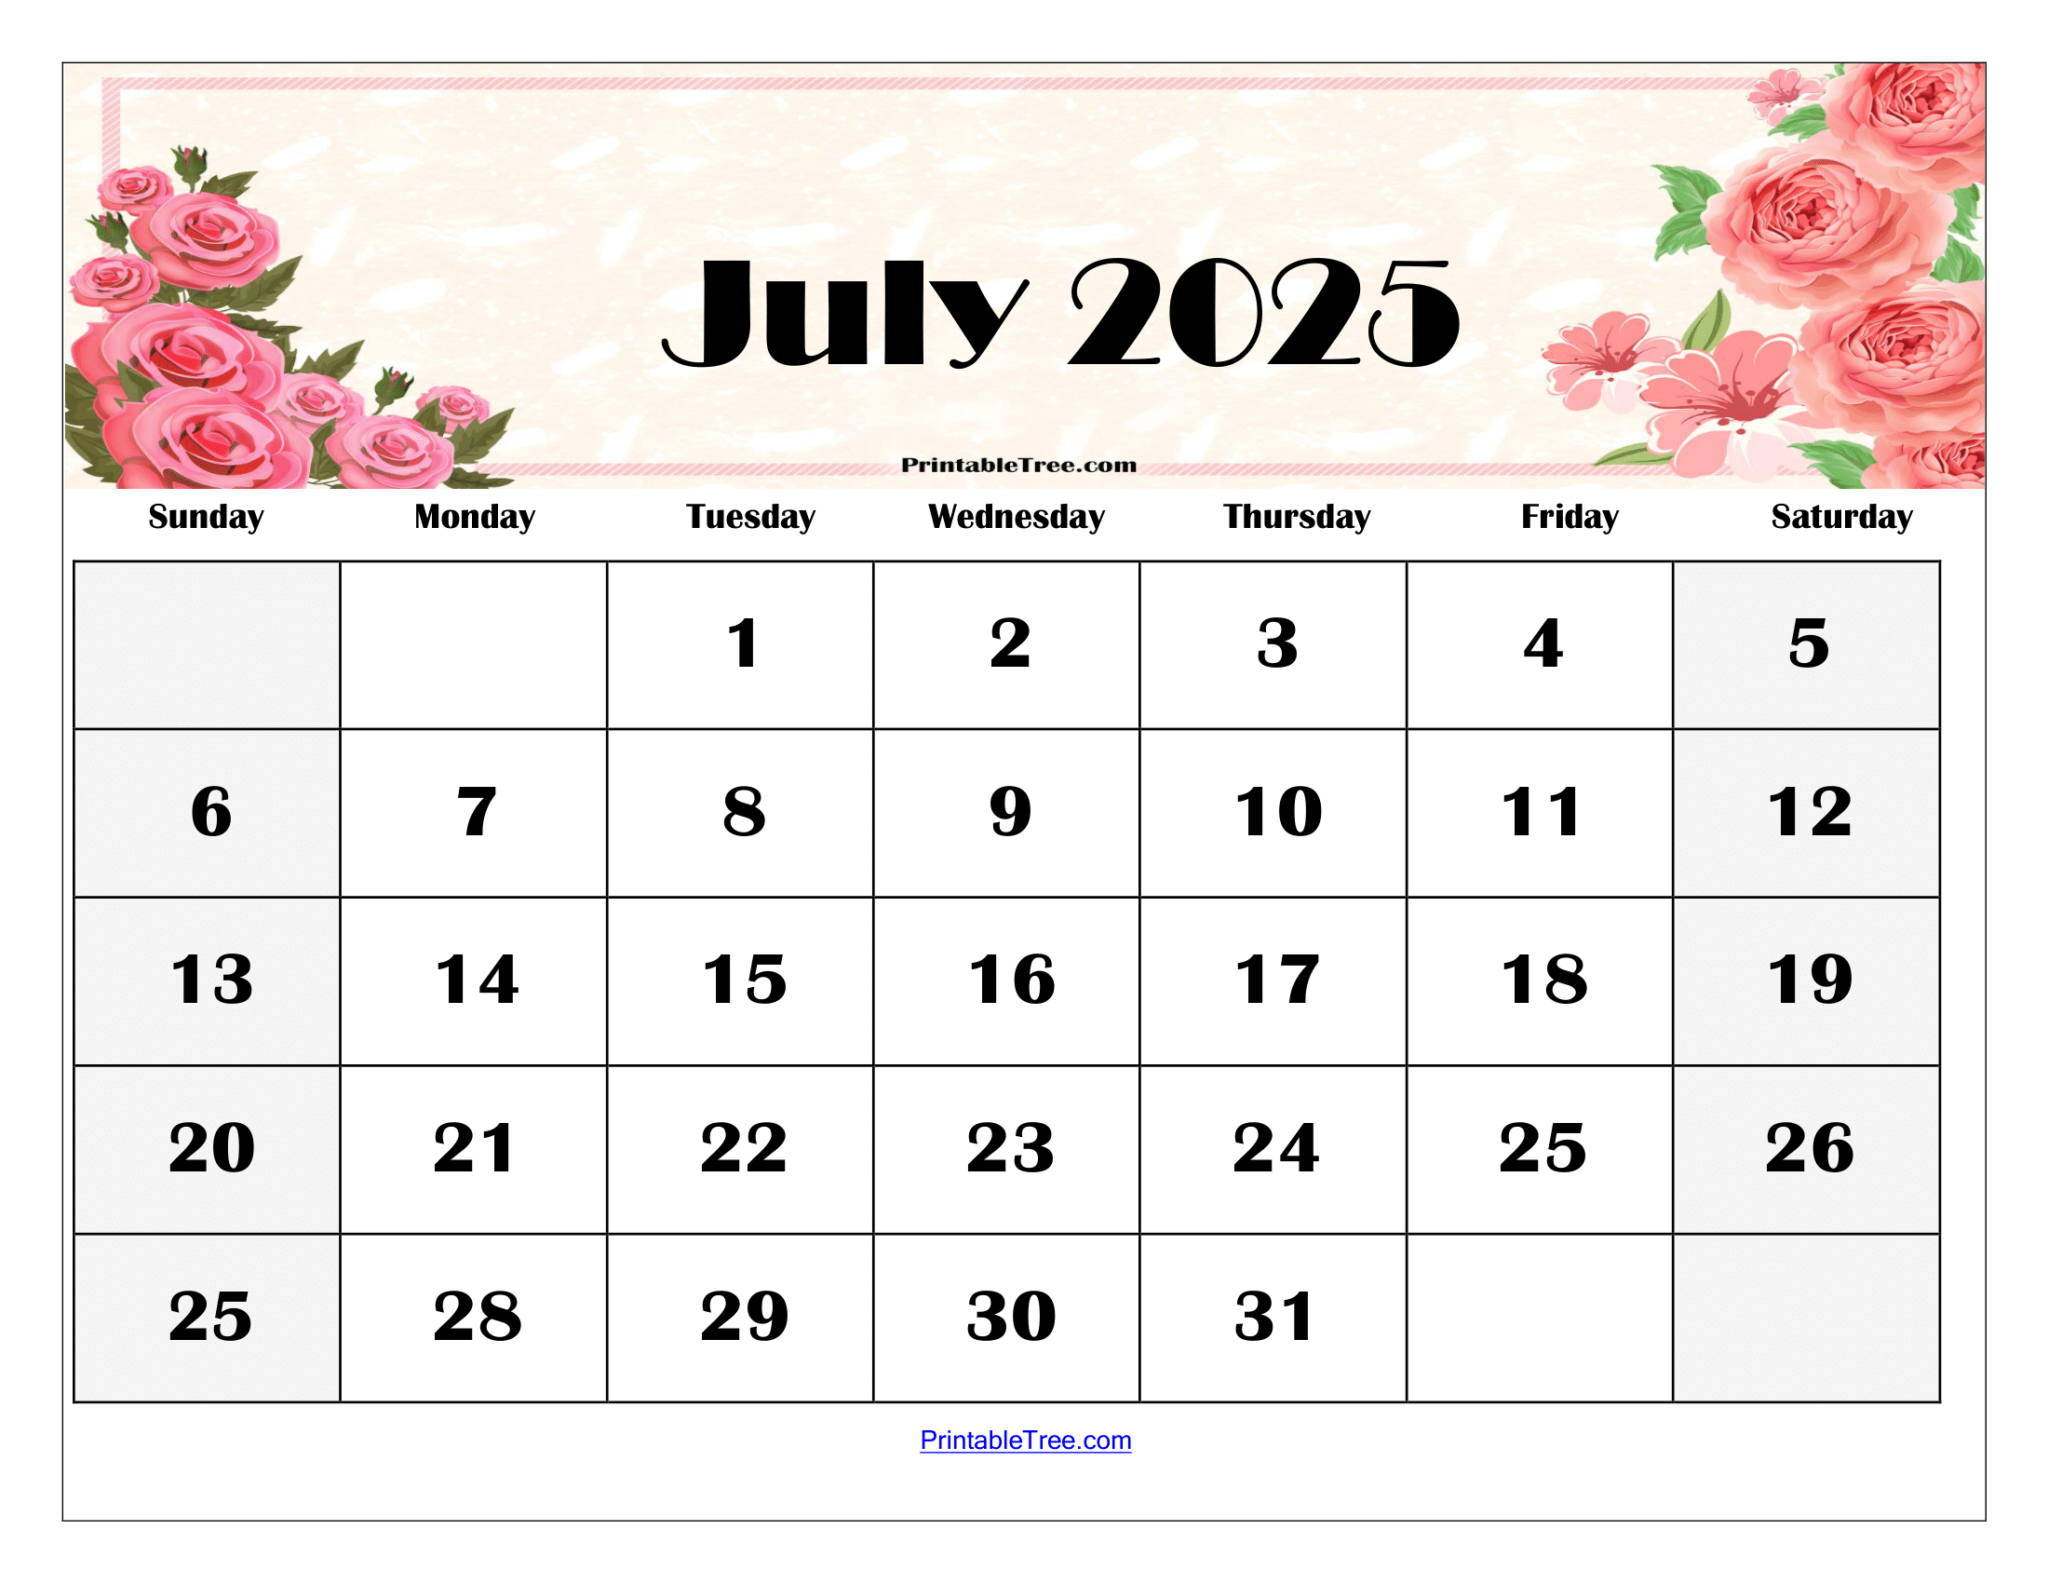 July 2025 Calendar Printable PDF Template with Holidays